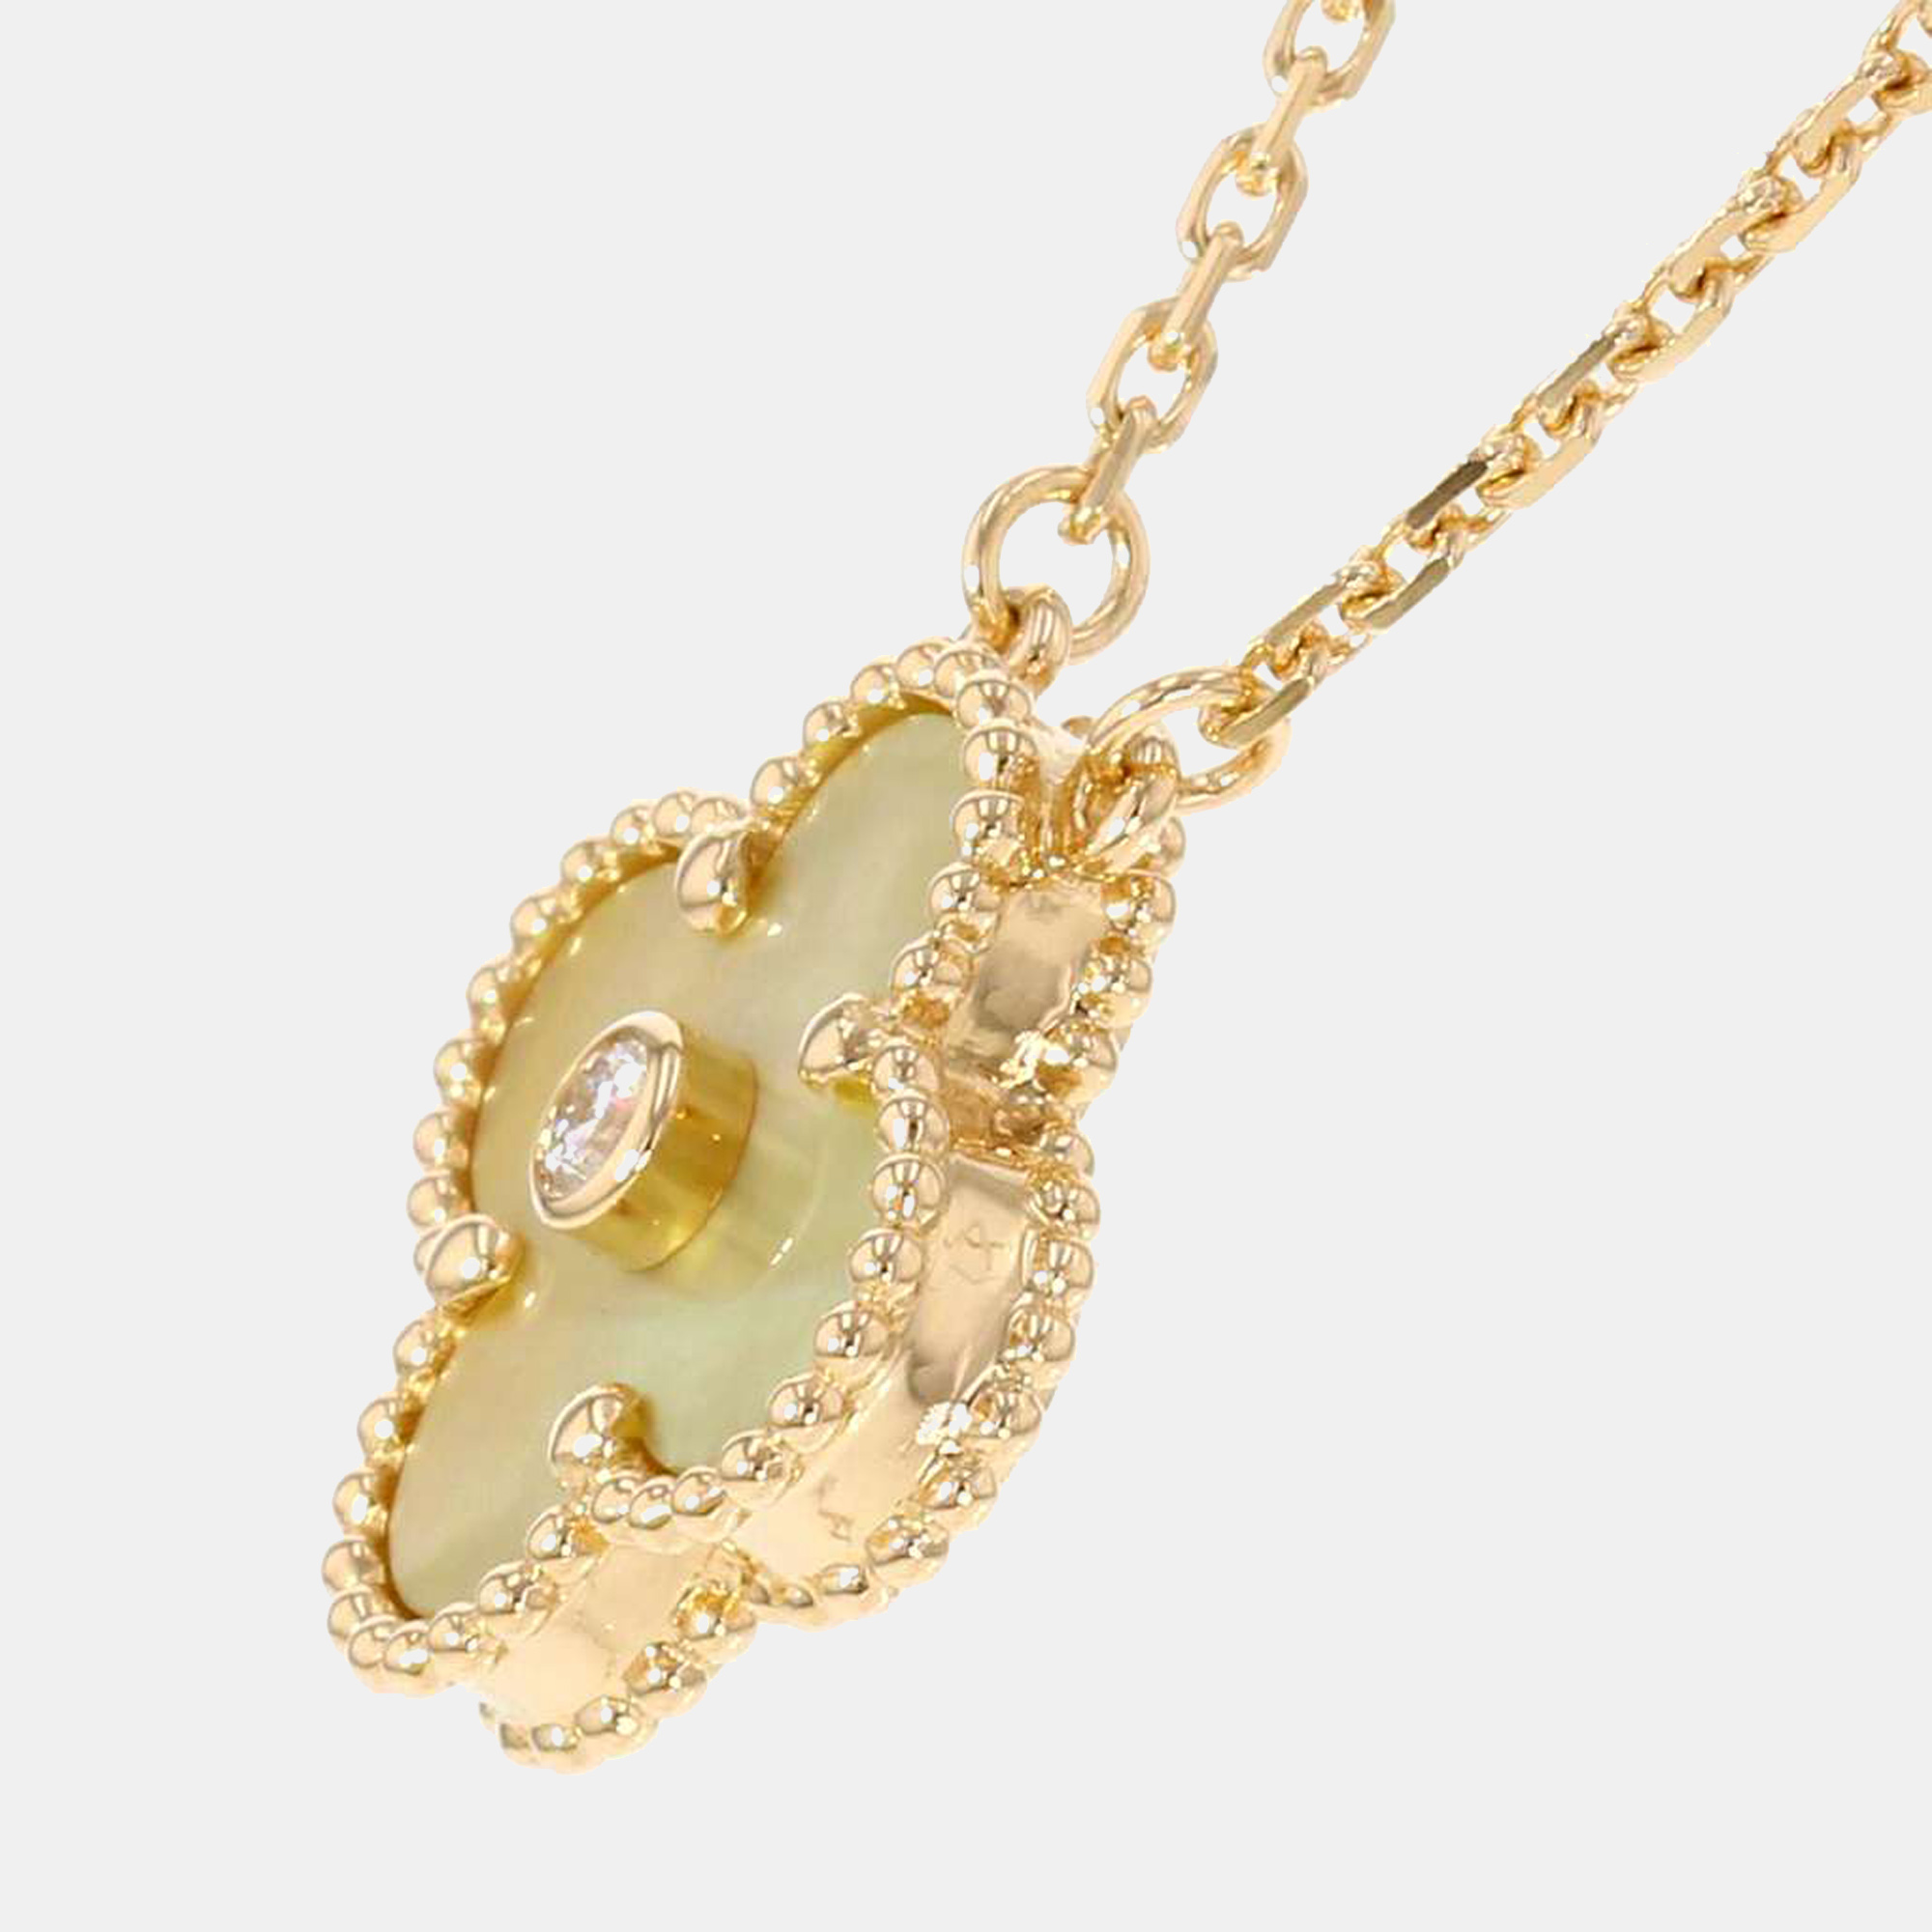 

Van Cleef & Arpels Limited Edition Vintage Alhambra 18K Yellow Gold Diamond and Mother of Pearl Necklace